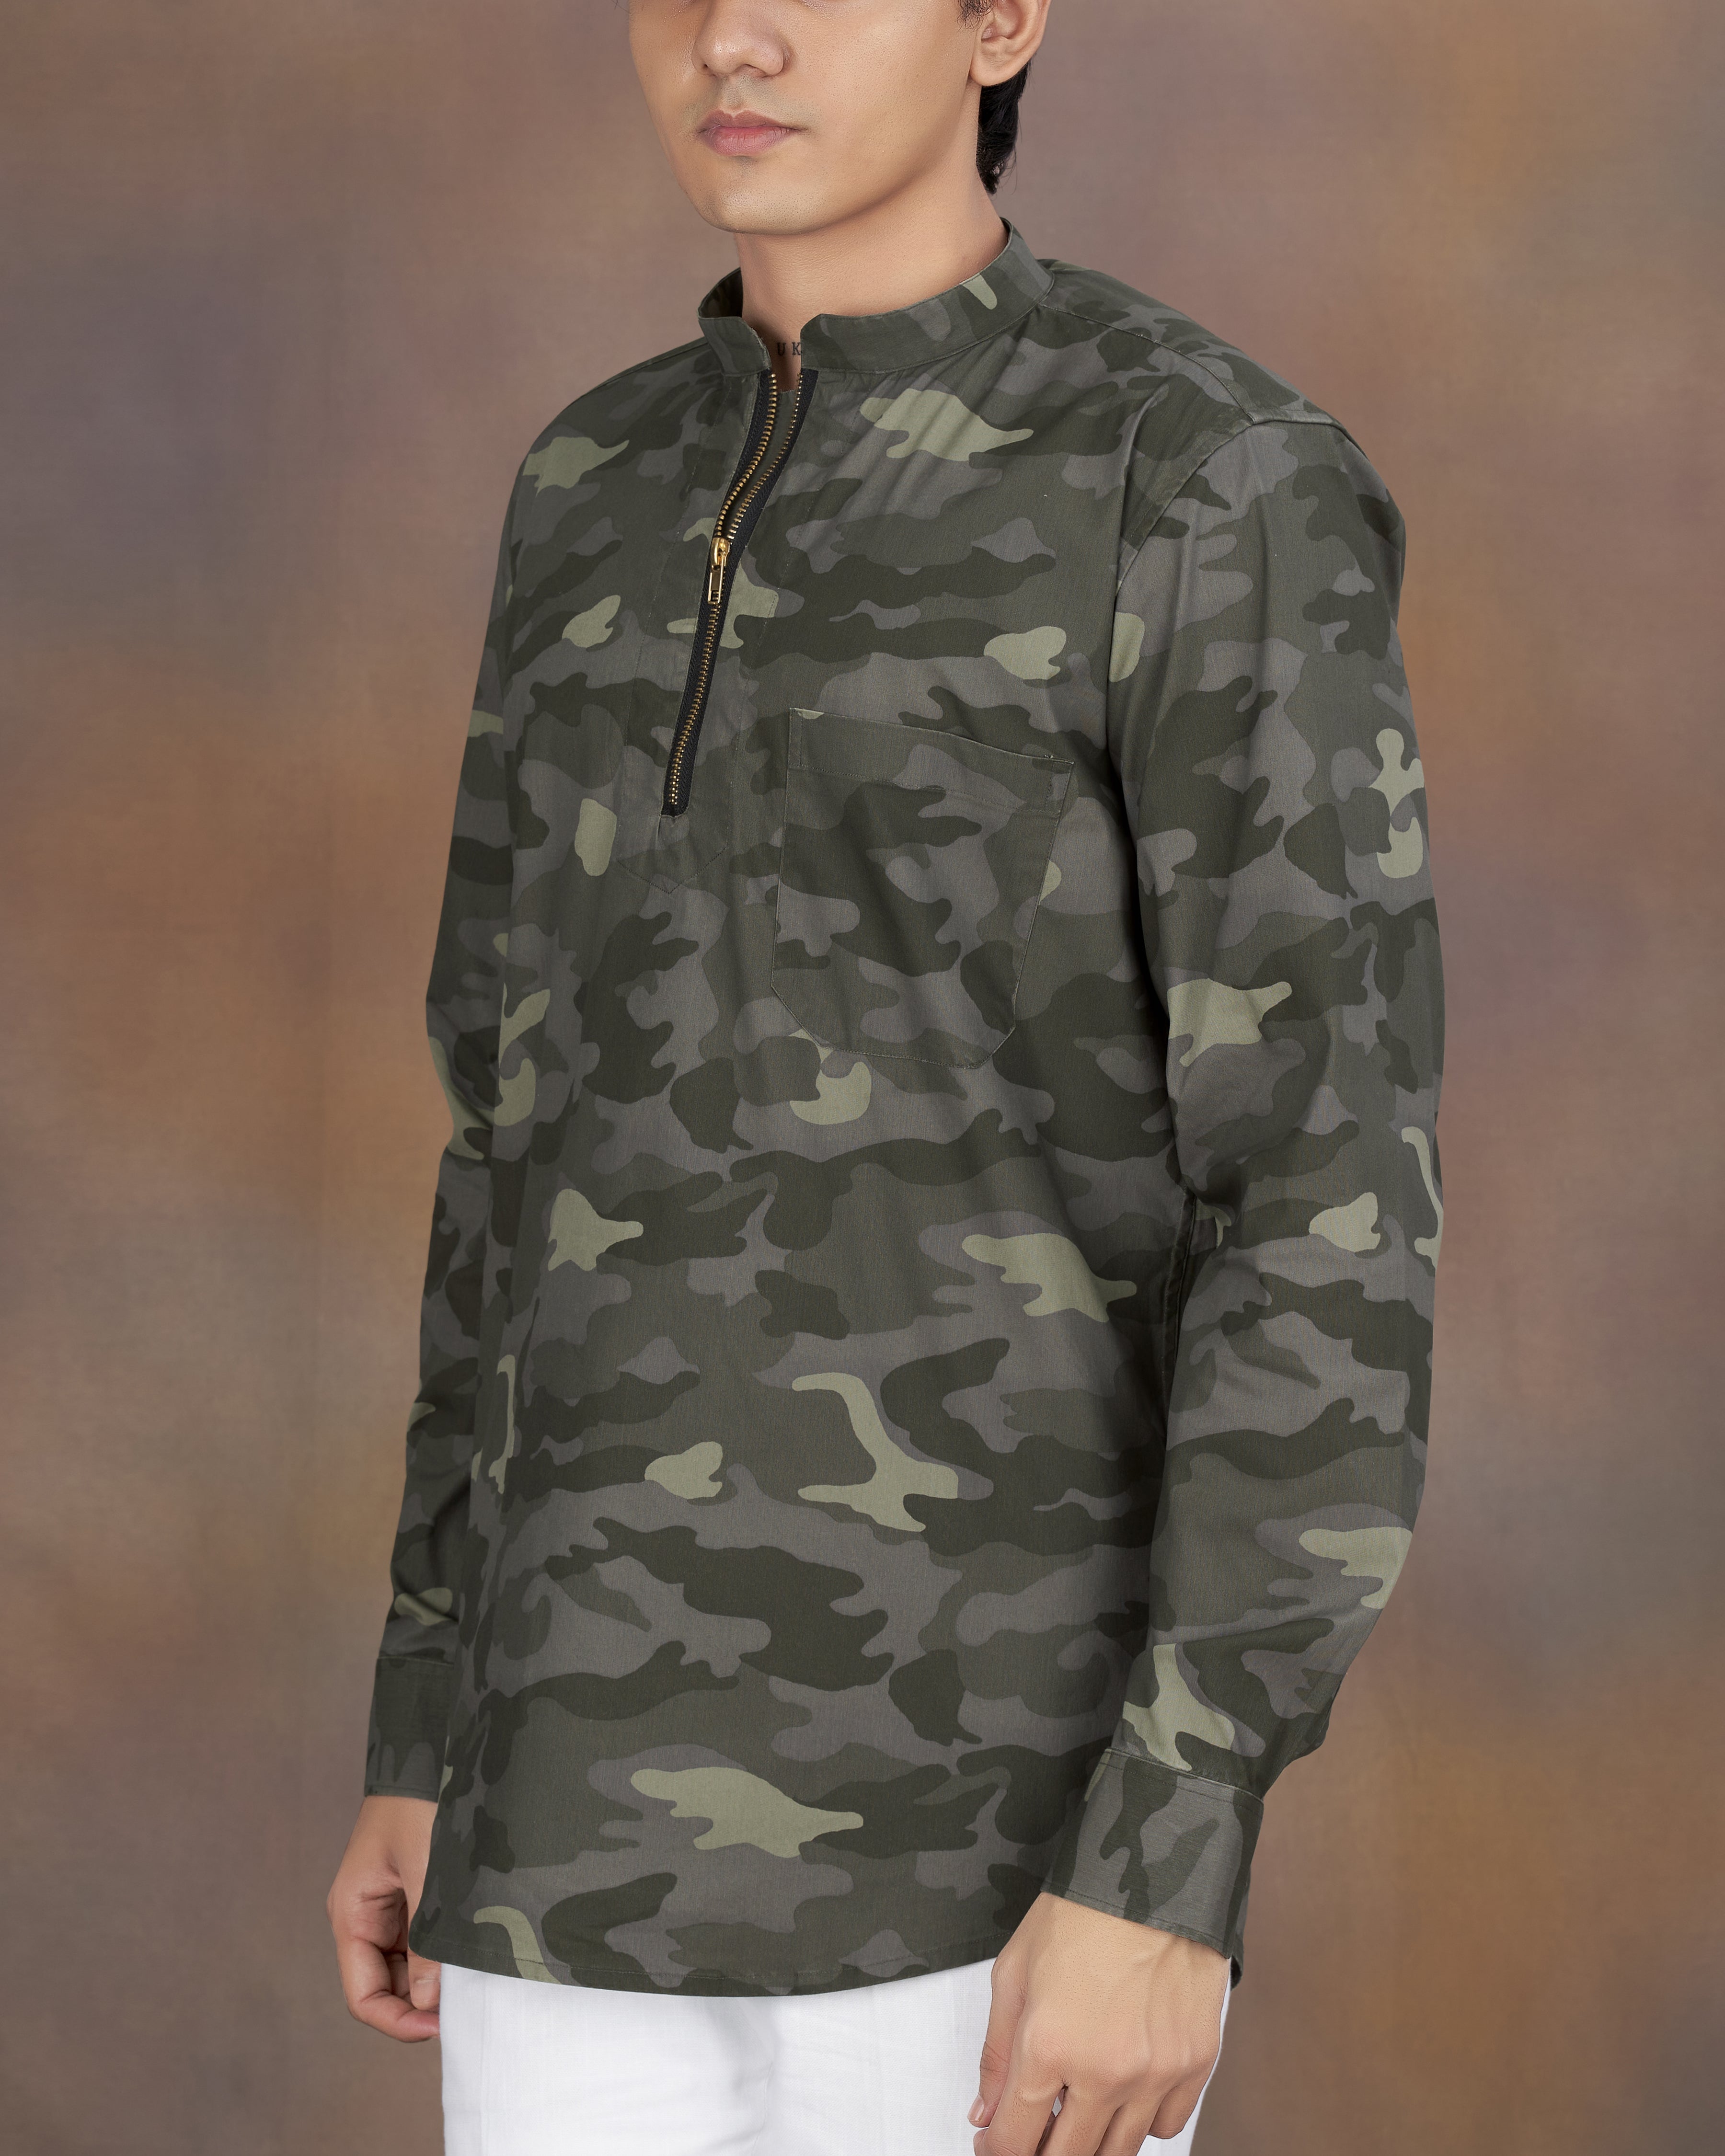 Birch Green with Wenge Gray Camouflage Printed Royal Oxford Designer zipper Shirt